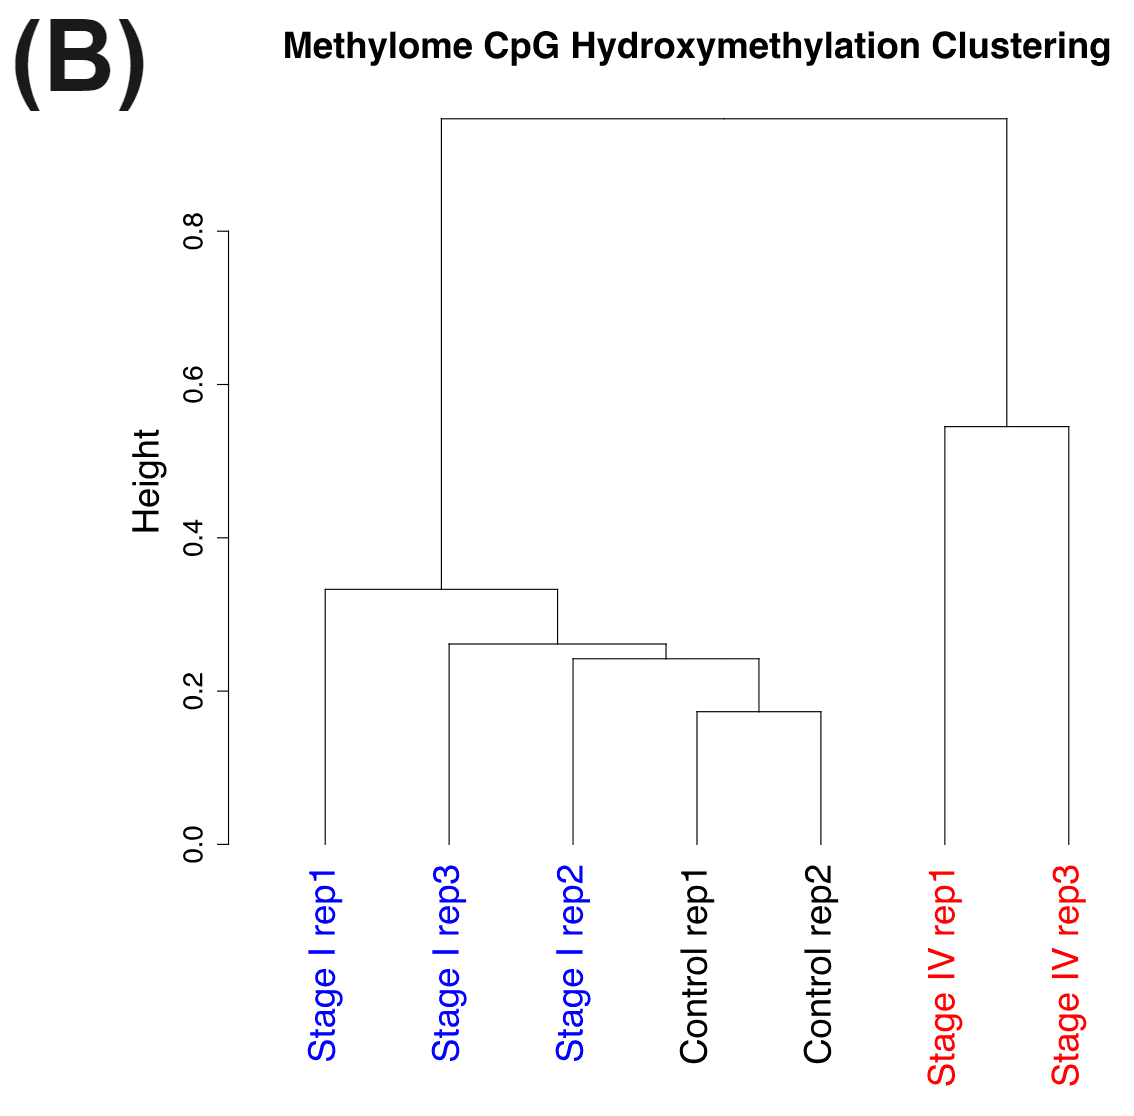 Methylome CpG hydroxymethylation clustering of Healthy and CRC samples using duet evoC